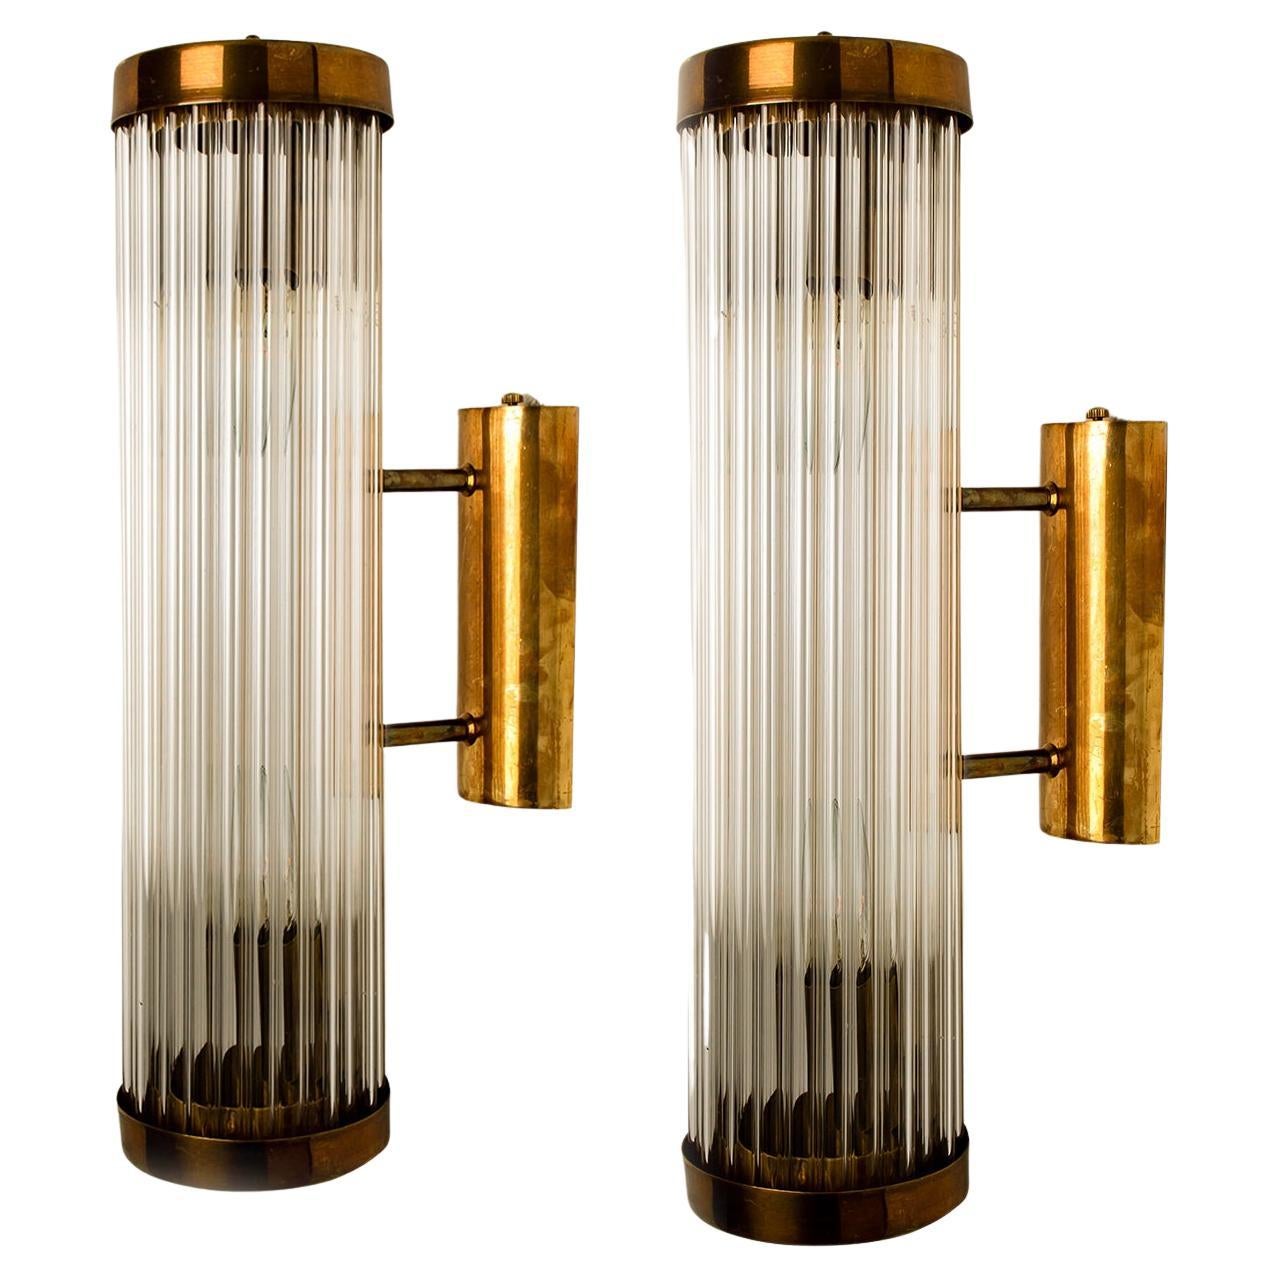 1 of the 6 Skyscraper Wall lights Art Deco Style